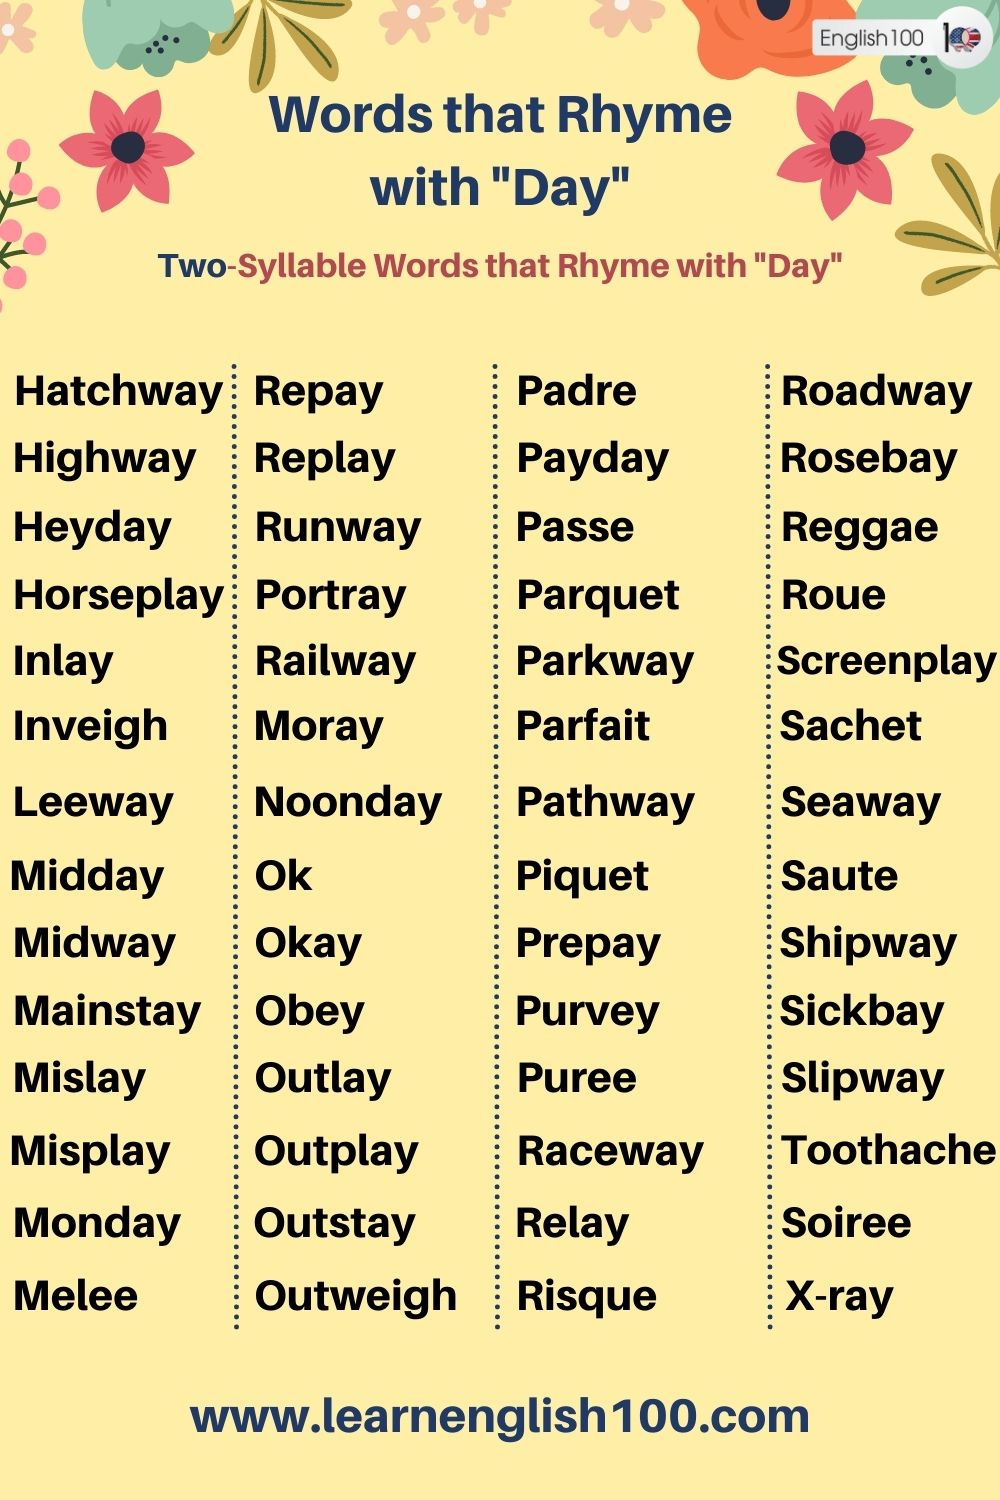 Words that Rhyme with "Love" / "Day" - English 100